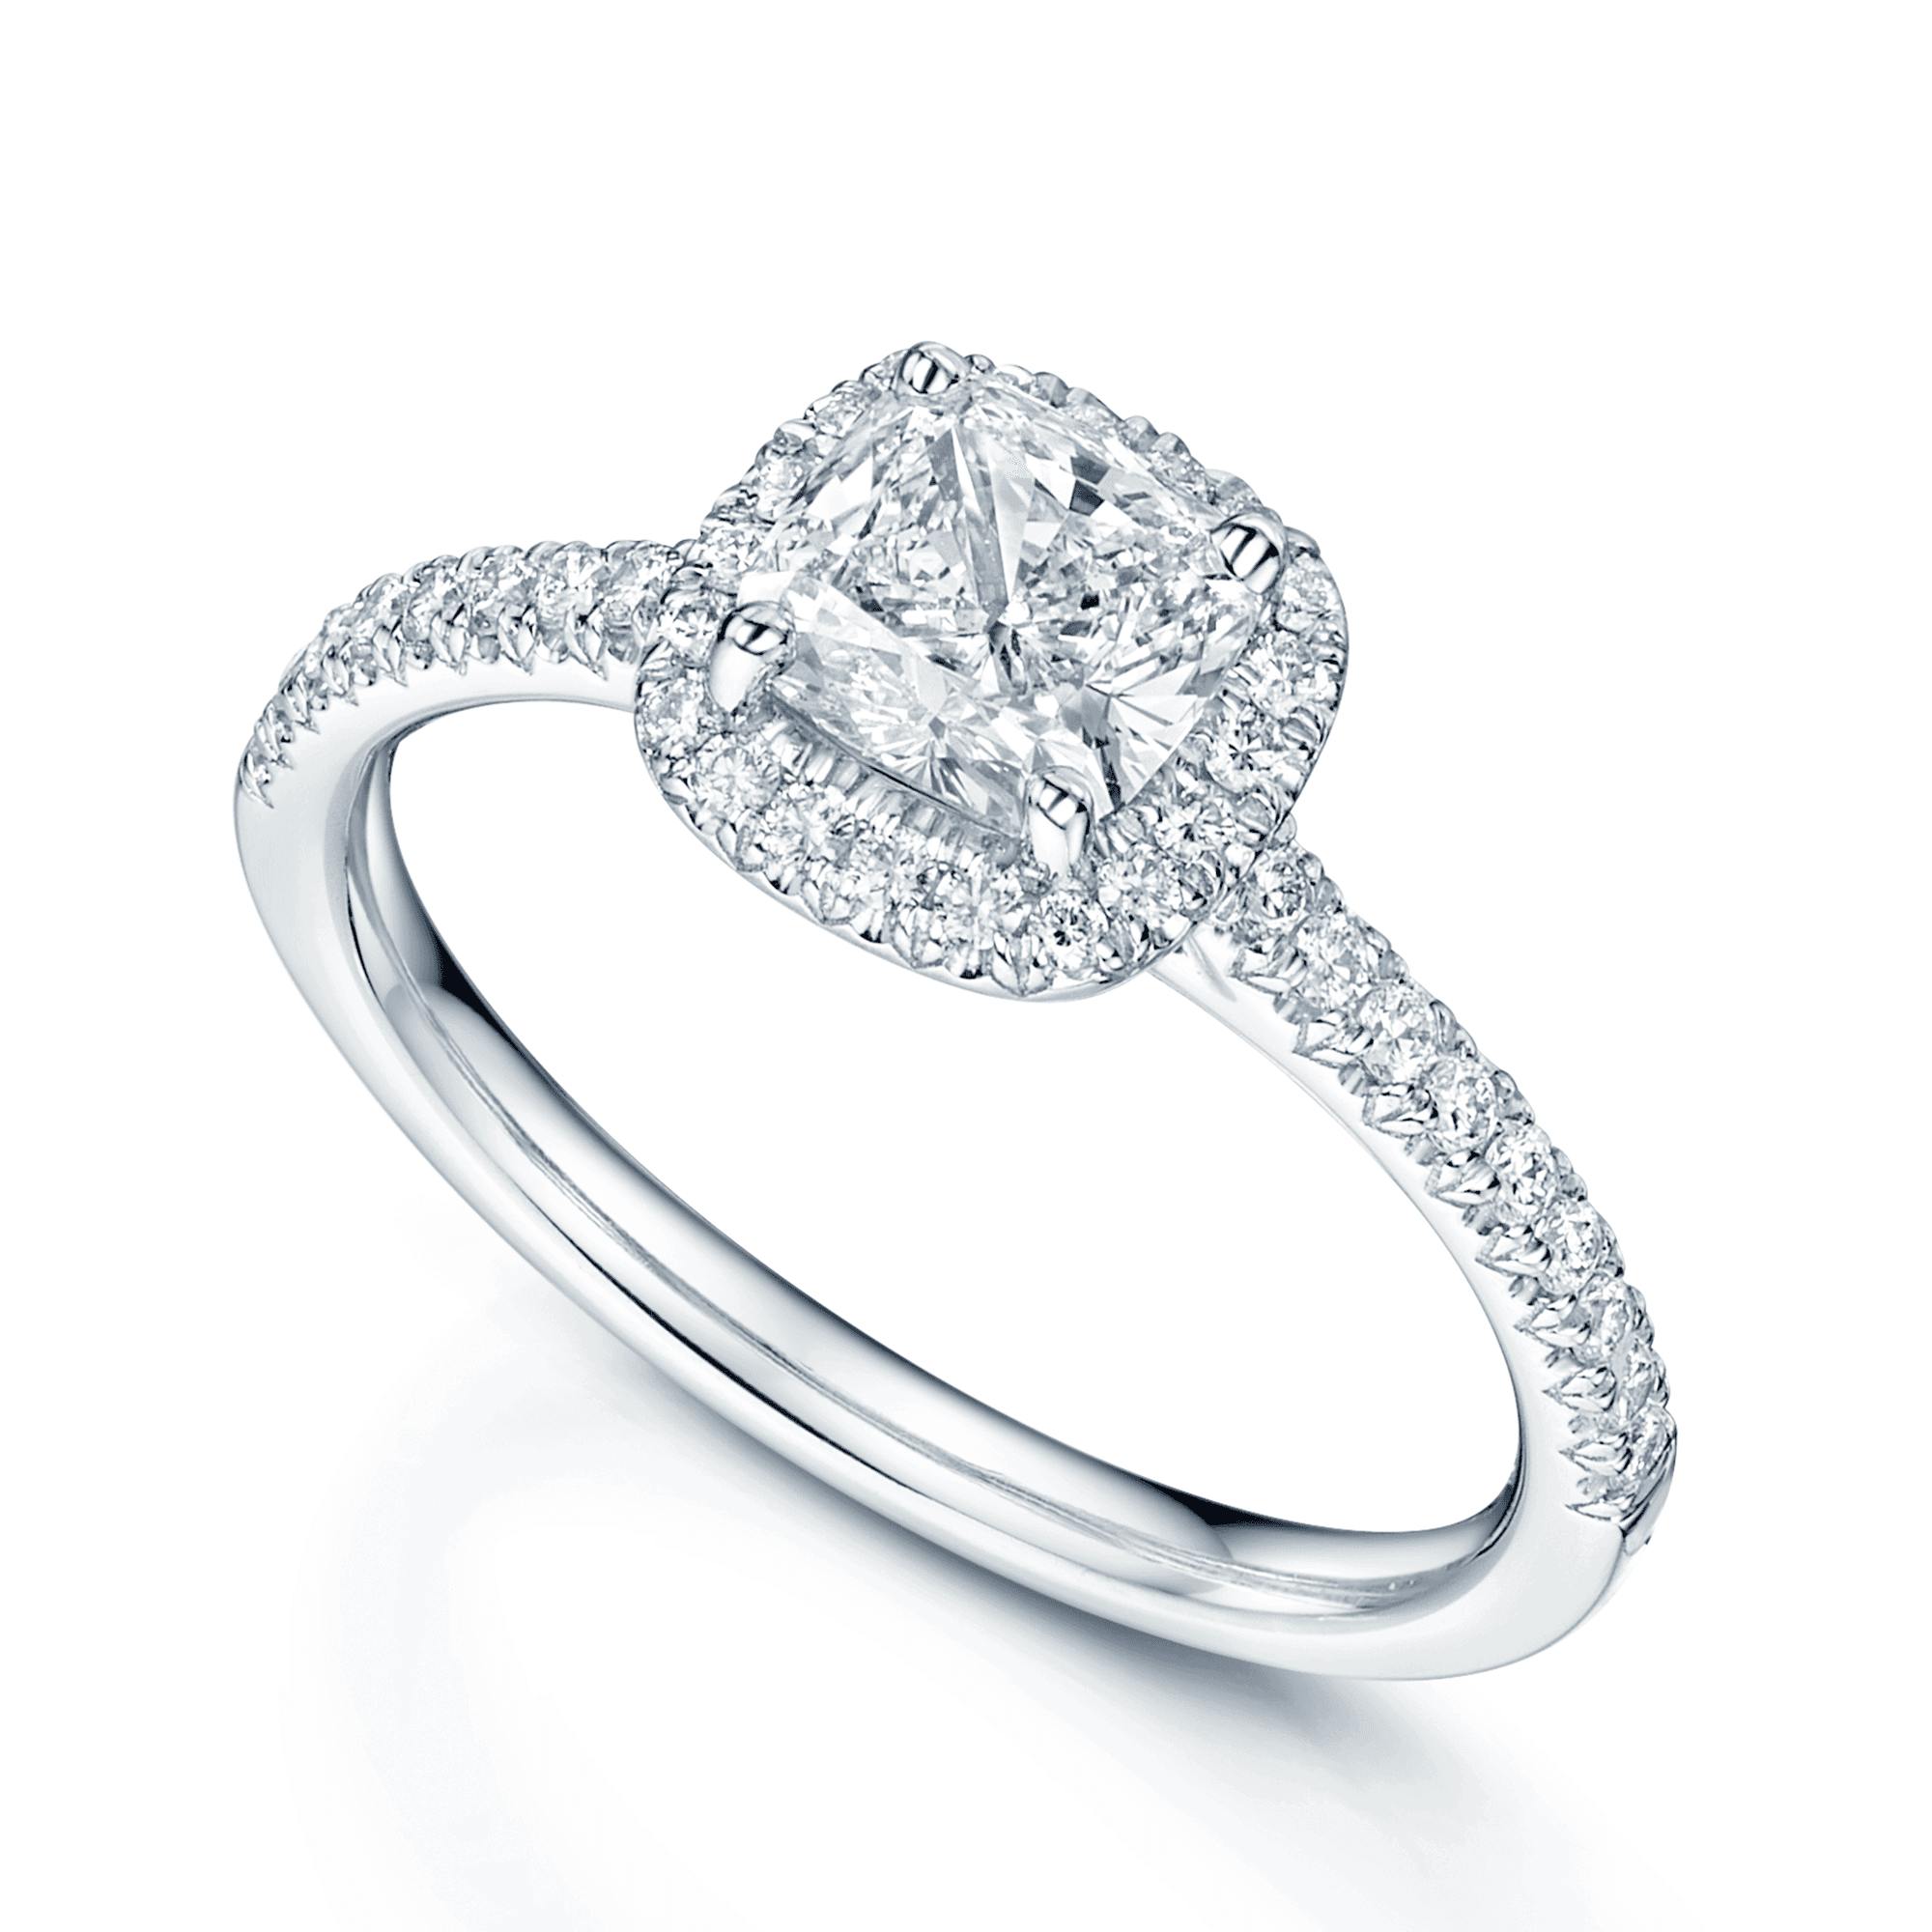 Platinum GIA Certificated Cushion Shaped Diamond Halo Cluster Ring With Diamond Set Shoulders